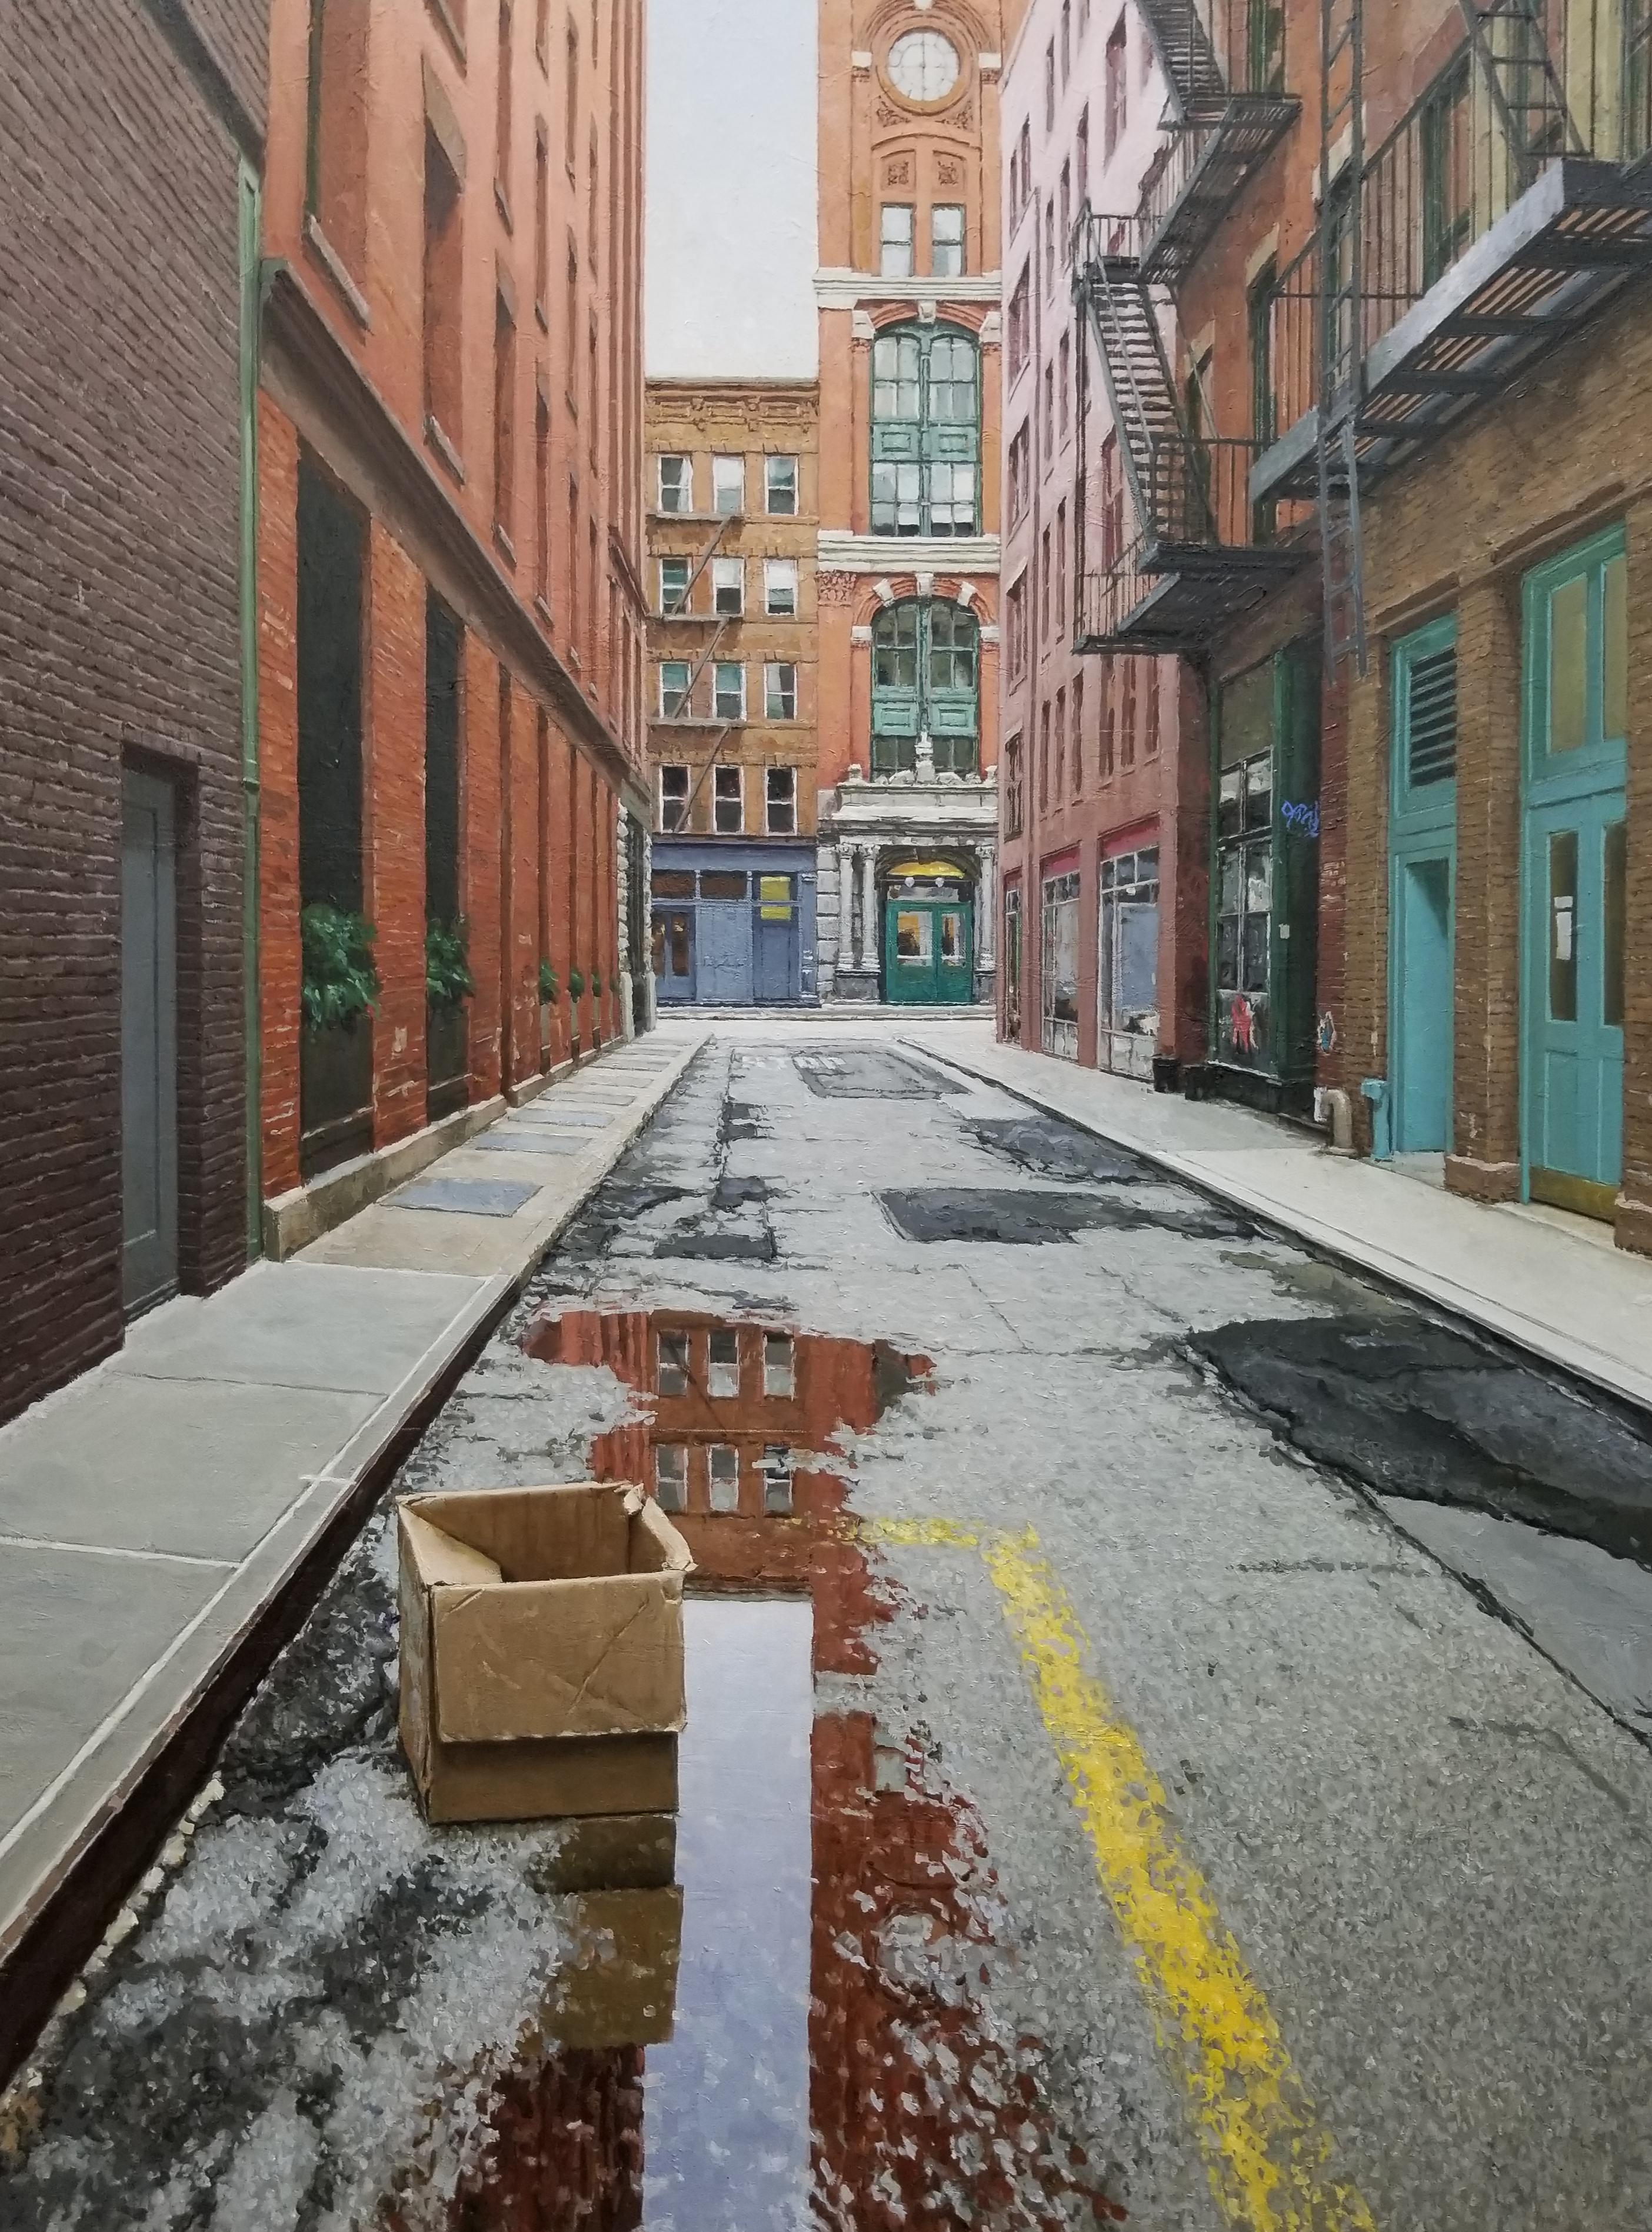 Richard Combes Landscape Painting - EARLY MORNING IN THE CITY, New York City, Puddle, Tribeca, Cobblestone, Old NY